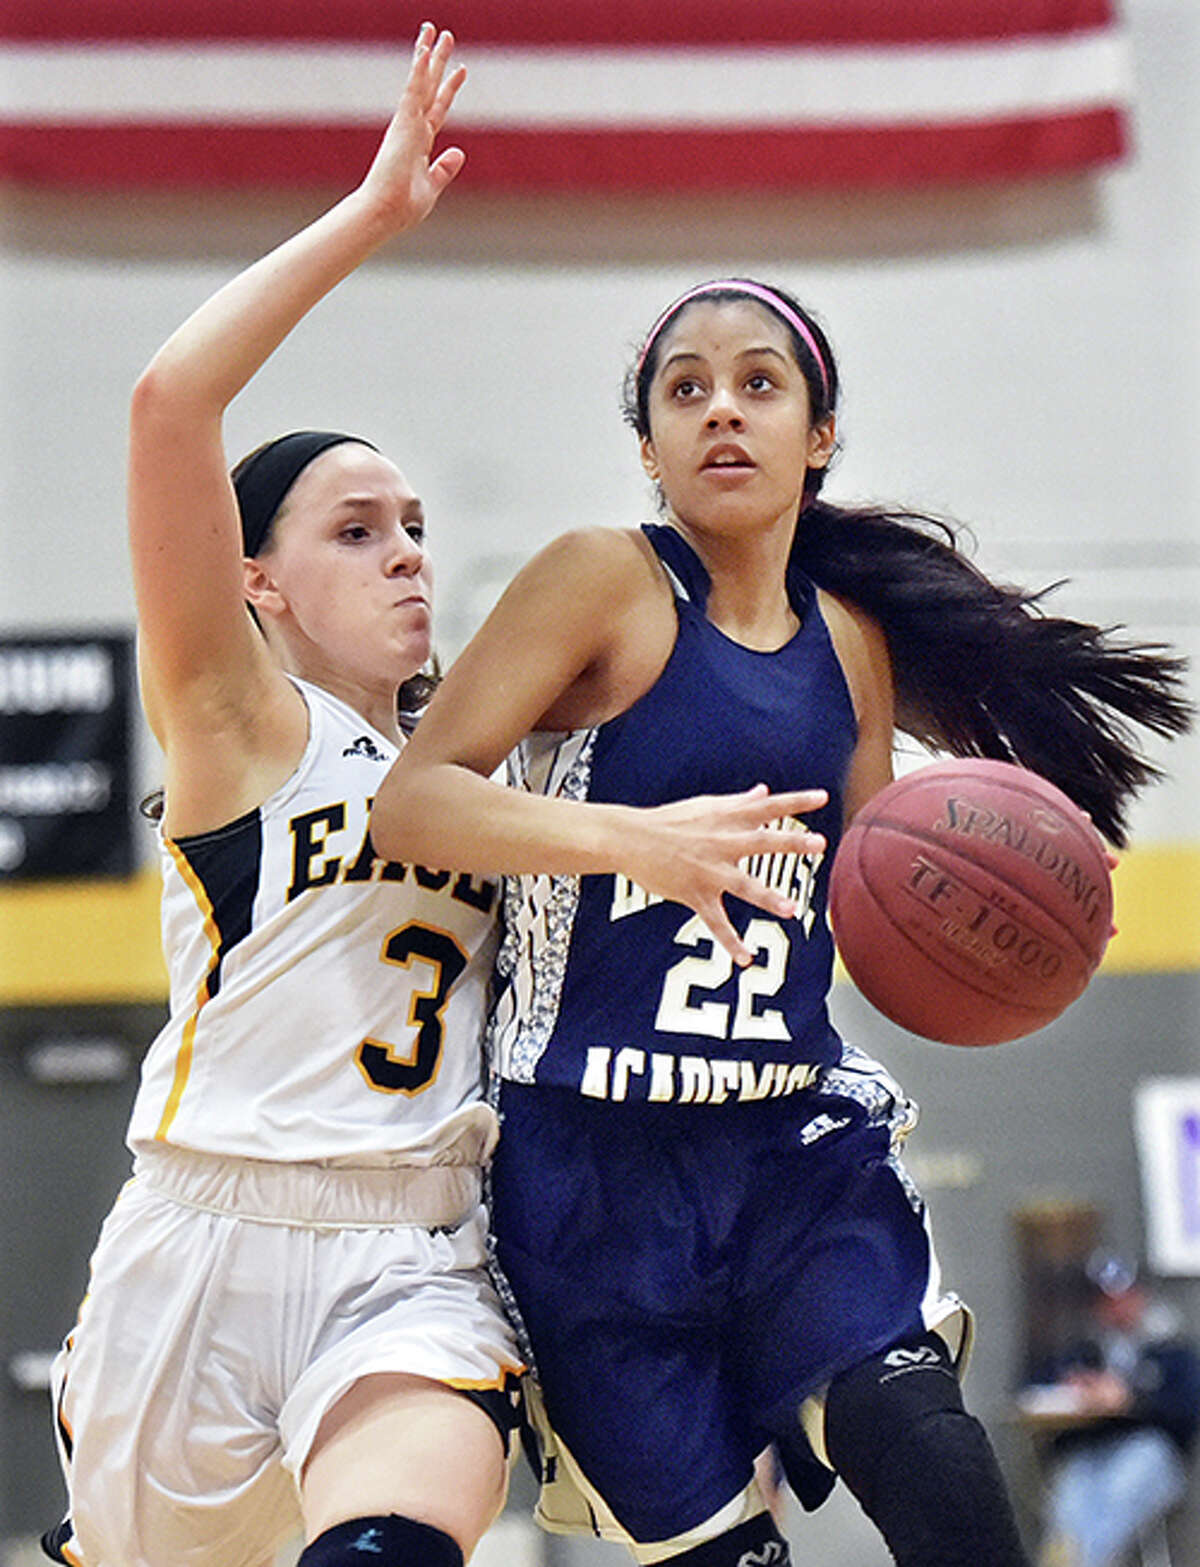 Hillhouse guard Allegra Jones drives the paint as Law’s Brook Hiatt defends in the SCC First Round game, Thursday, February 19, 2015. The Hillhouse Academics defeated the Law Eagles, 49-43, at Jonathan Law High School gymnasium in Milford. (Catherine Avalone – New Haven Register)